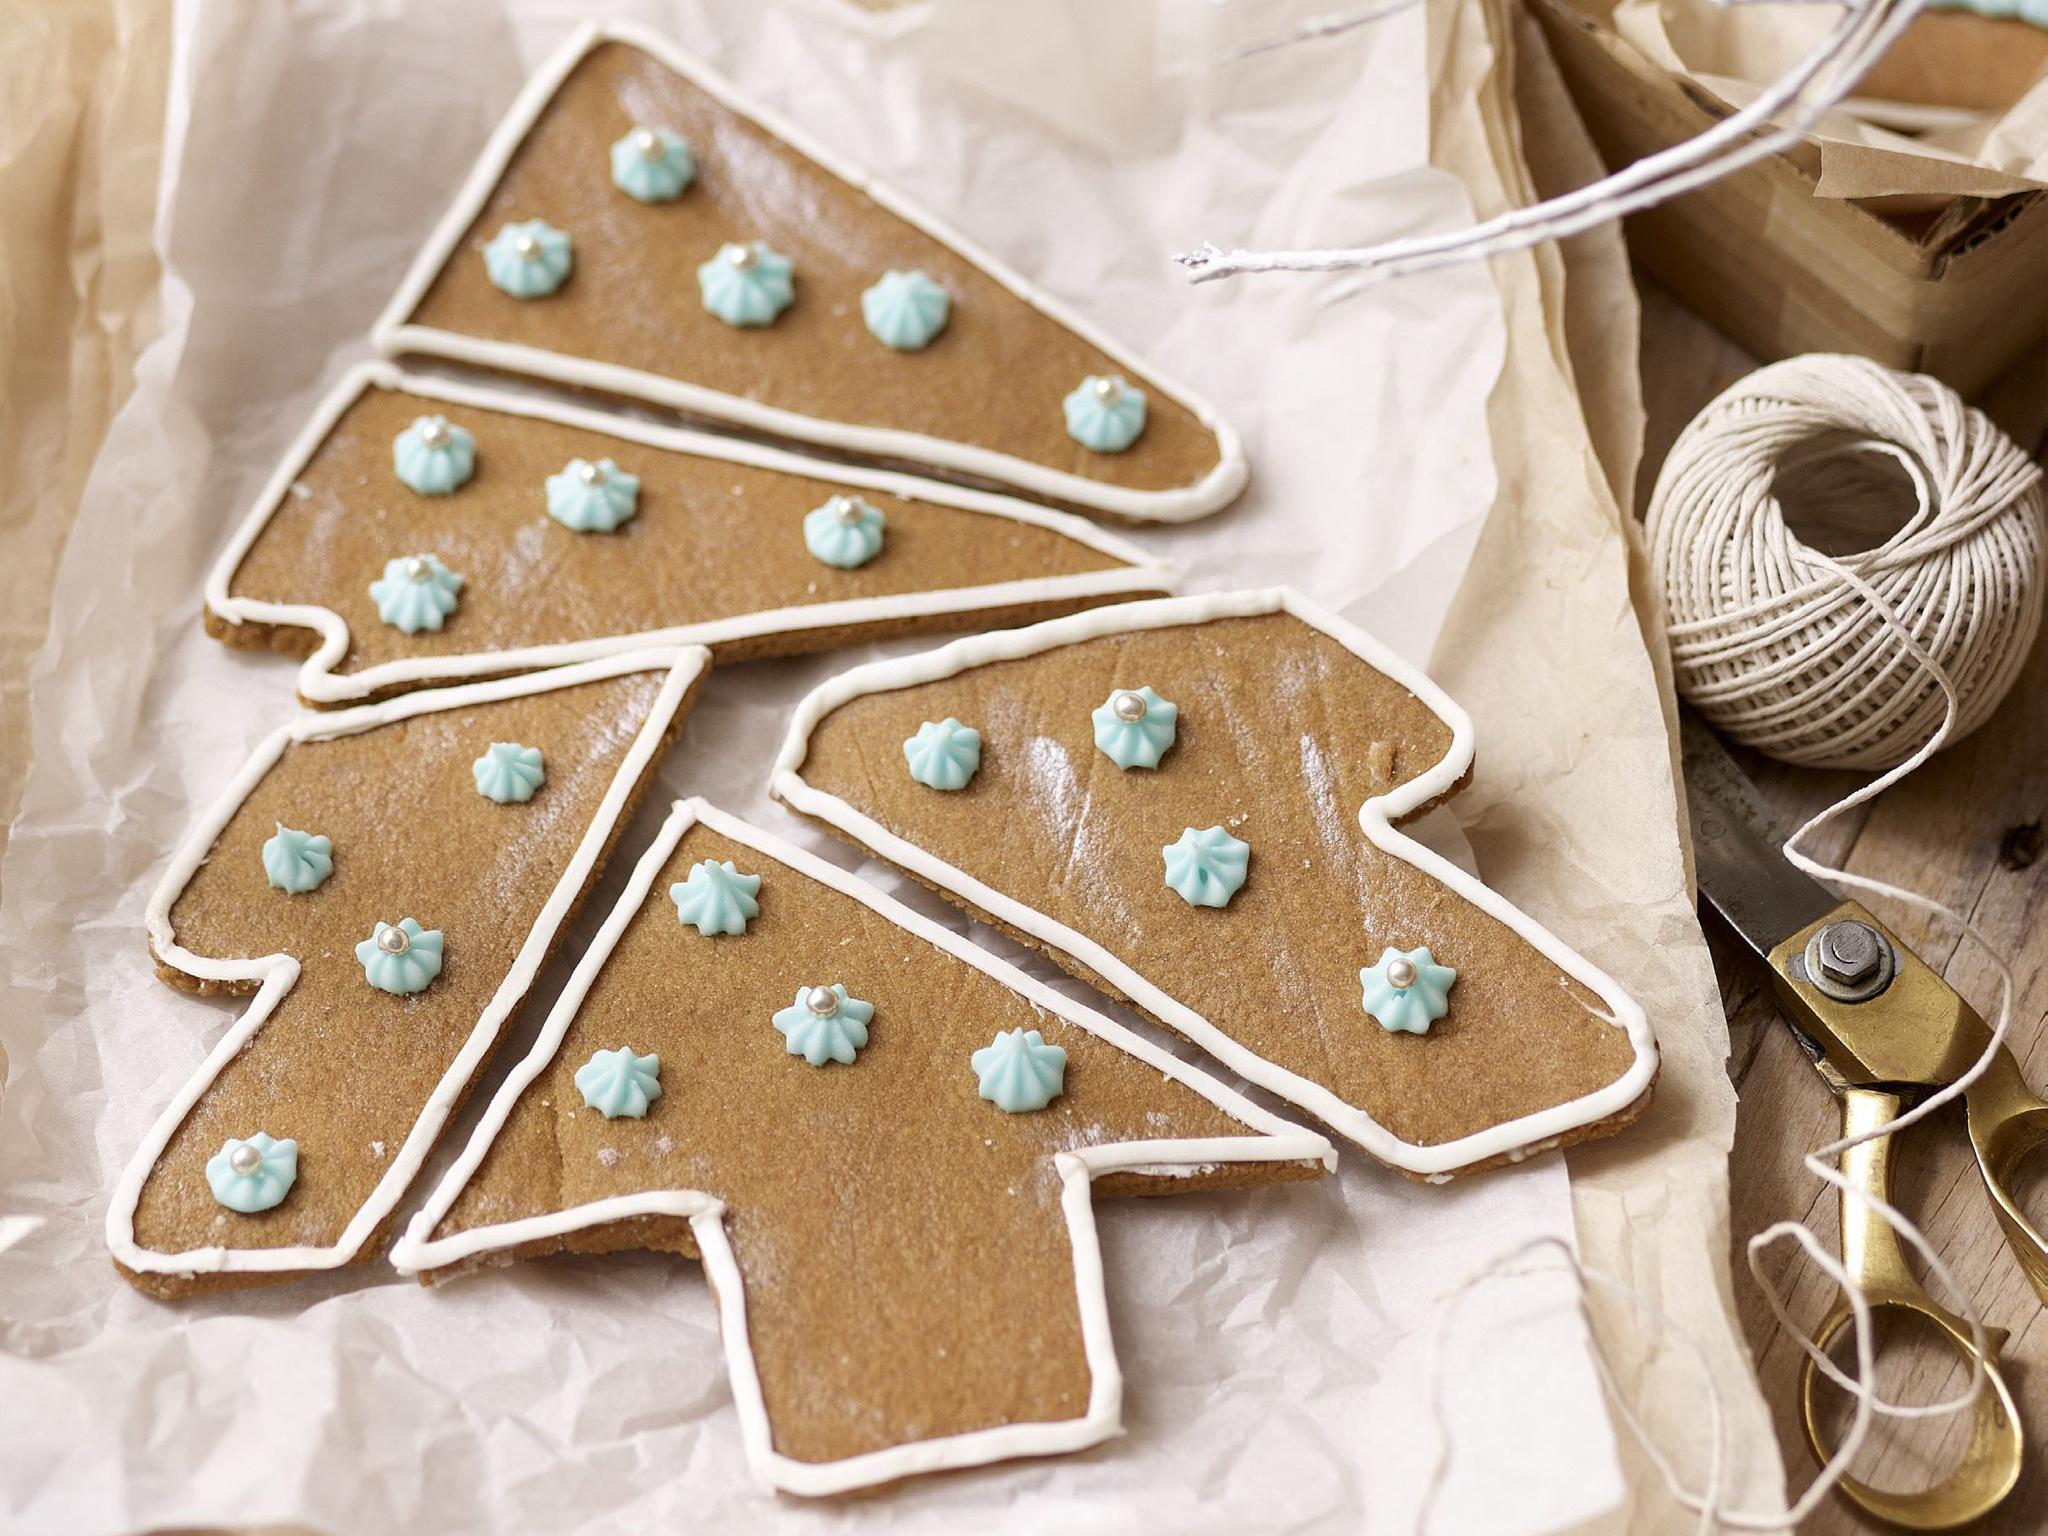 Our favourite spiced Christmas biscuits